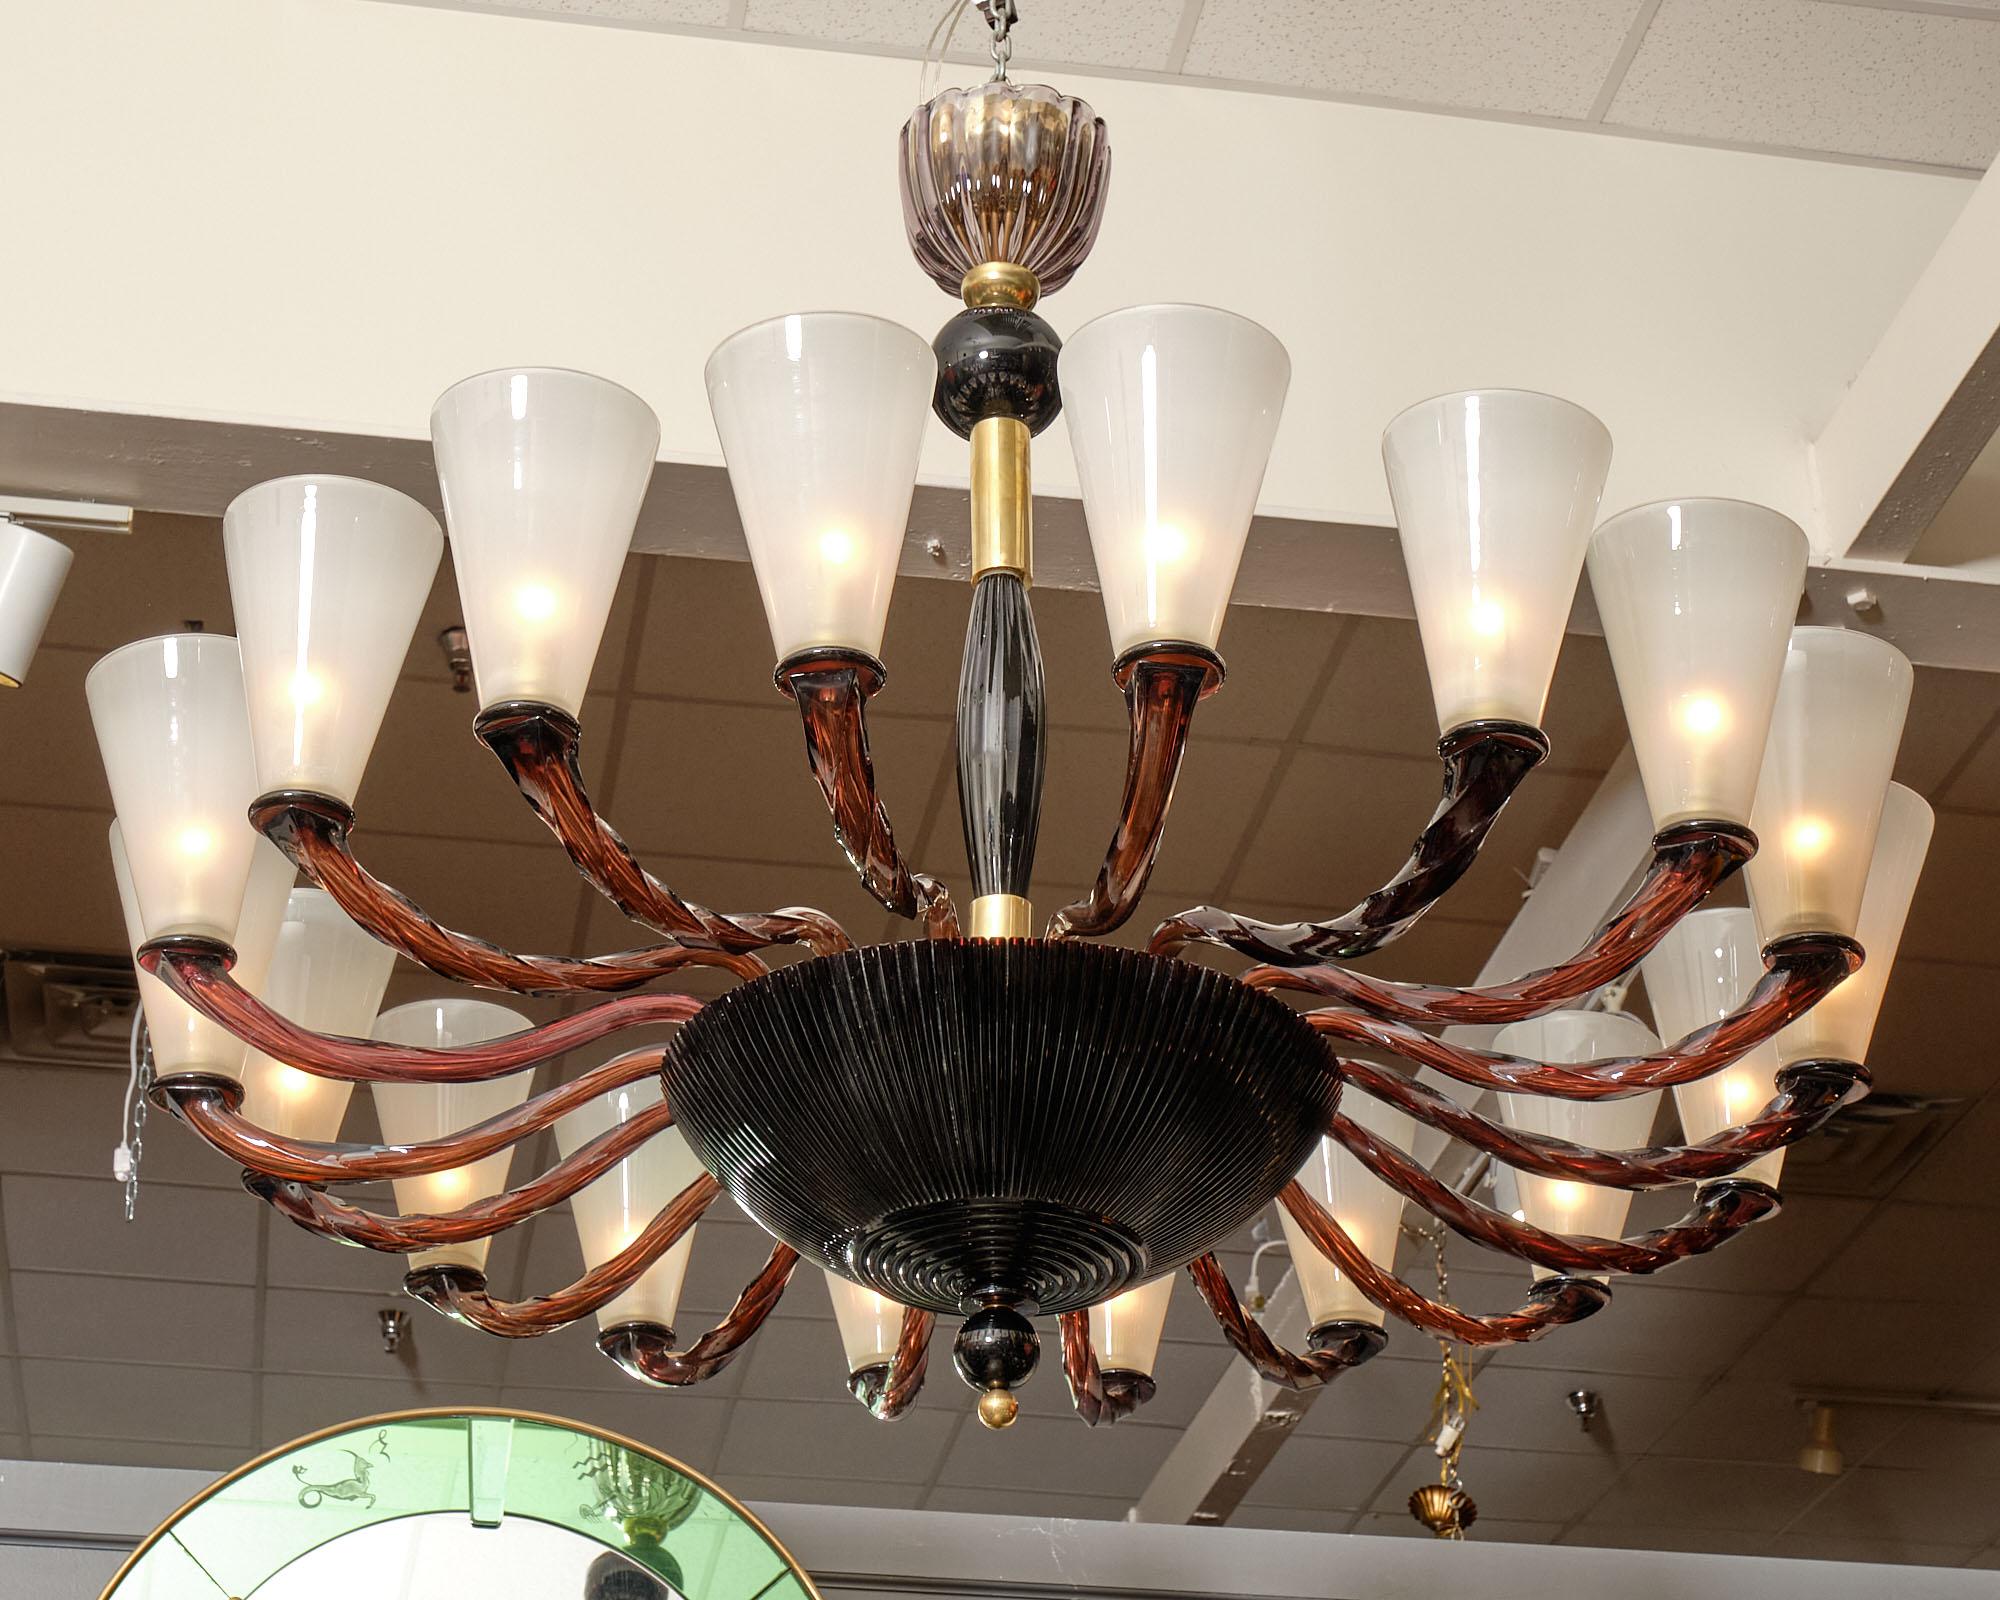 Vintage Italian chandelier attributed to the iconic Seguso factory on the island of Murano. This piece has 18 “braided” branches crafted in a dark amethyst Murano glass. These branches support 18 frosted cone shaped Murano shades. This chandelier is